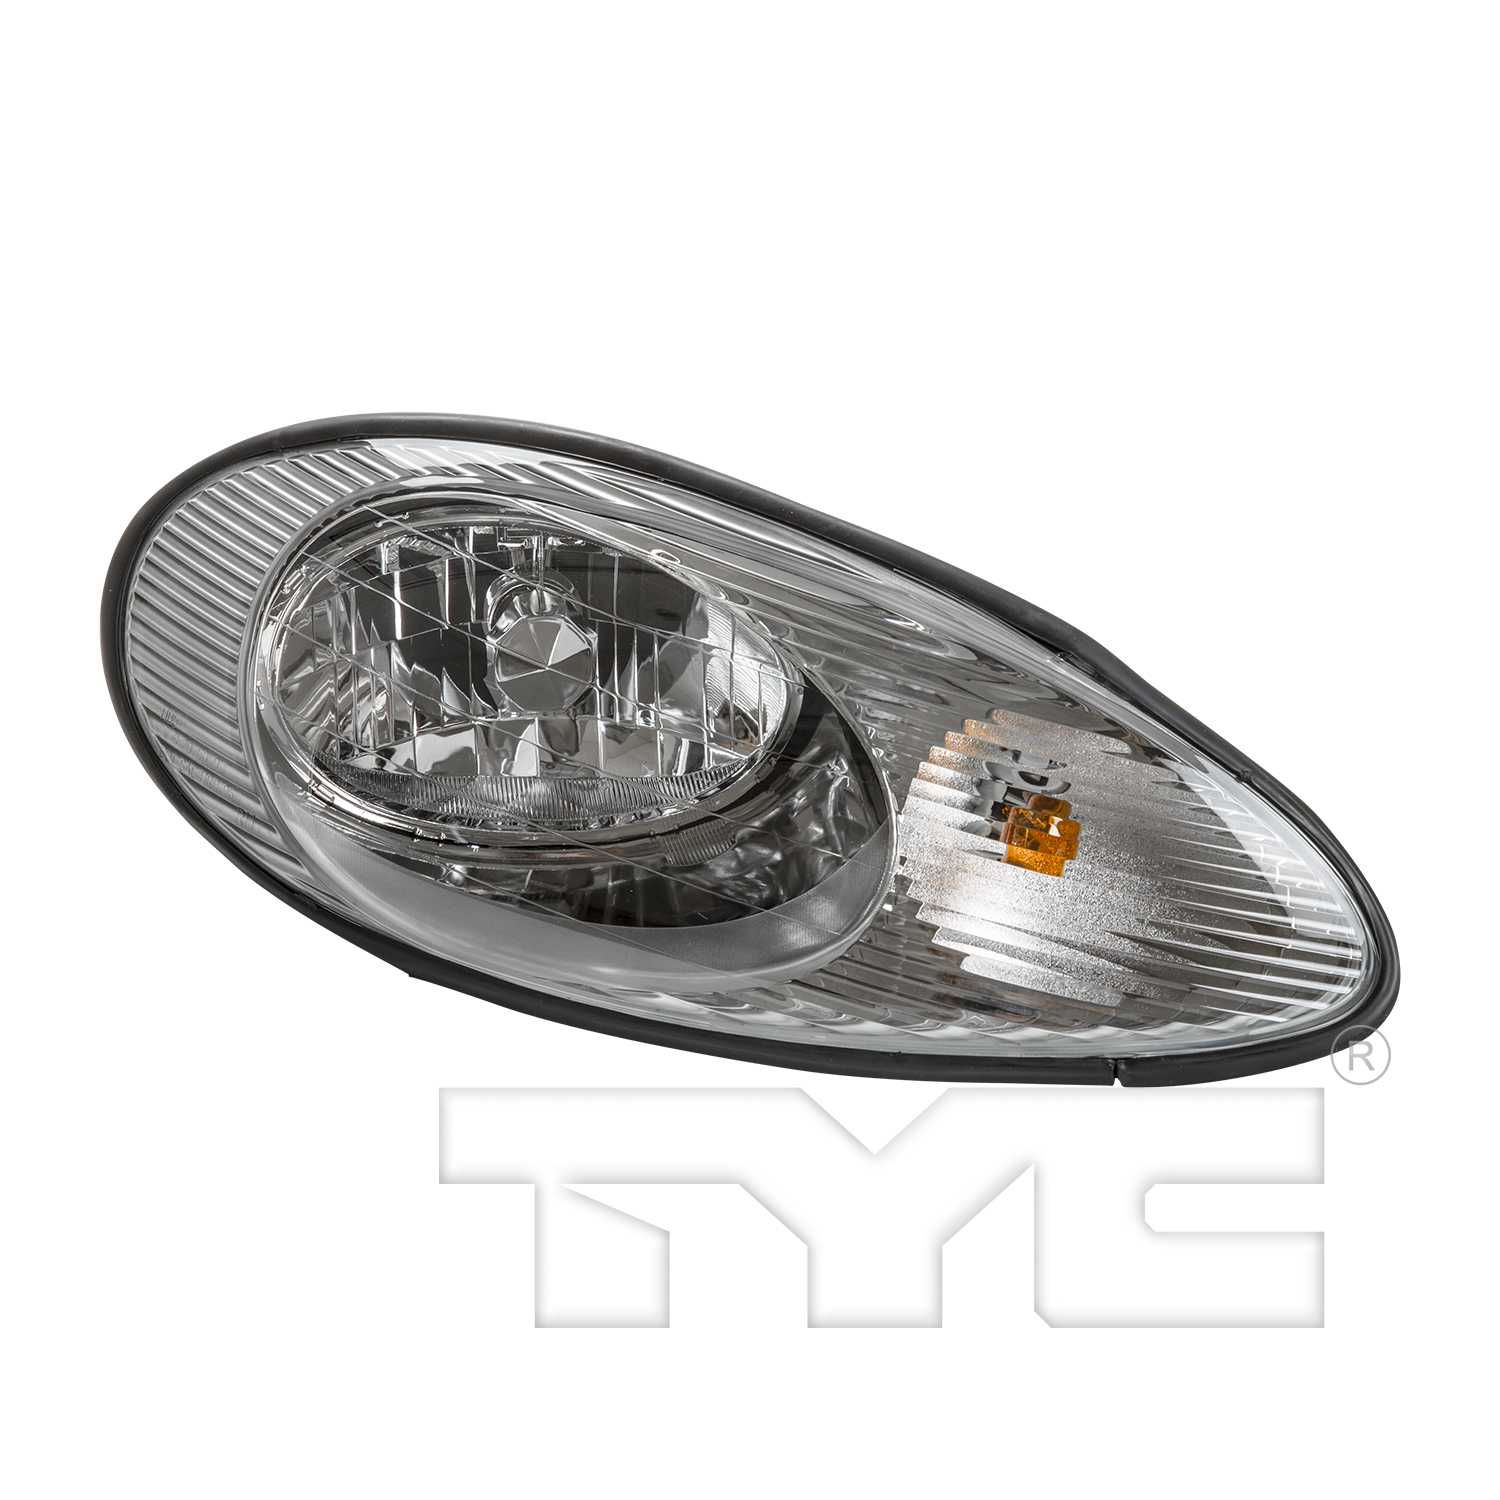 Aftermarket HEADLIGHTS for MERCURY - SABLE, SABLE,96-99,RT Headlamp assy composite